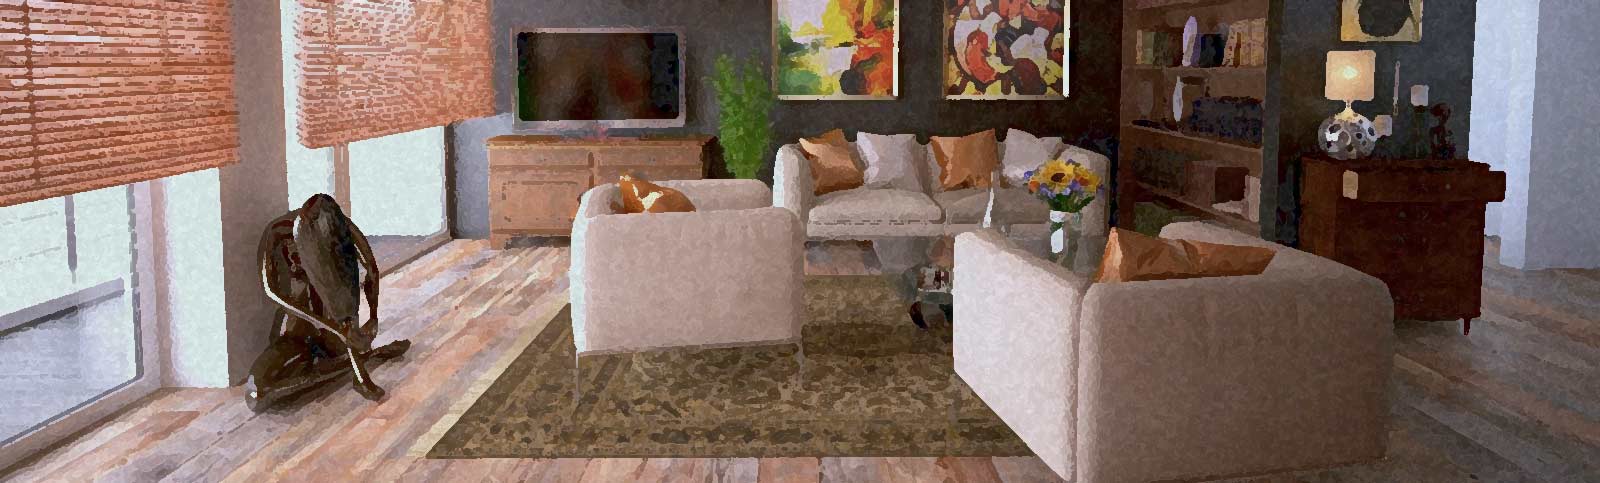 Adding a New Look To Your Living Room